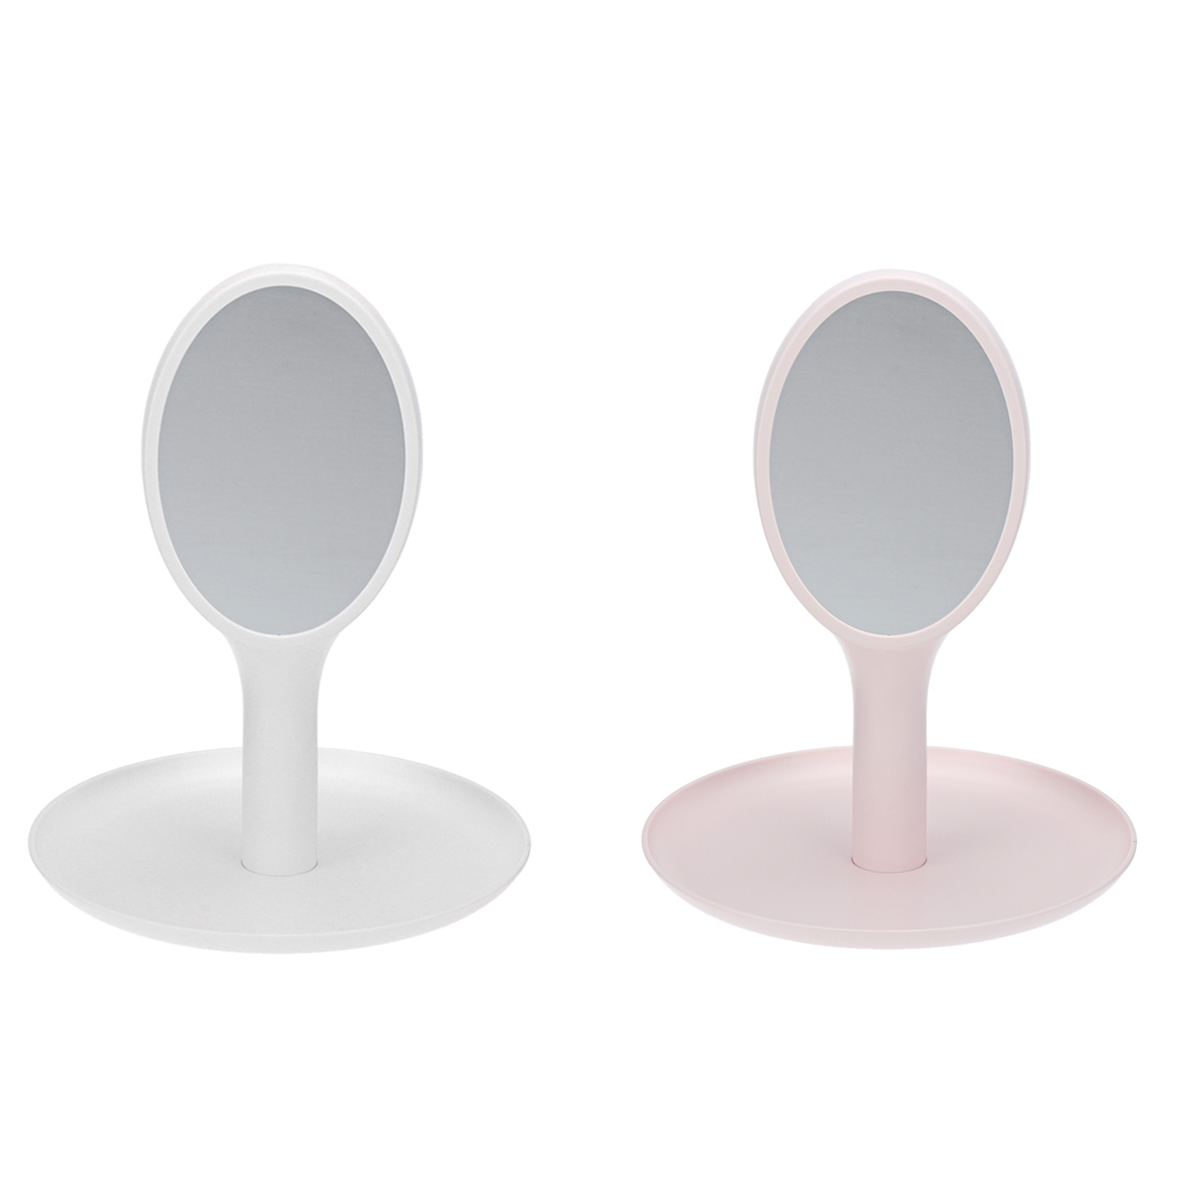 Double-Sided-Table-Makeup-Mirrors-Desktop-Cosmetics-Dressing-Beauty-Rotating-1643702-1